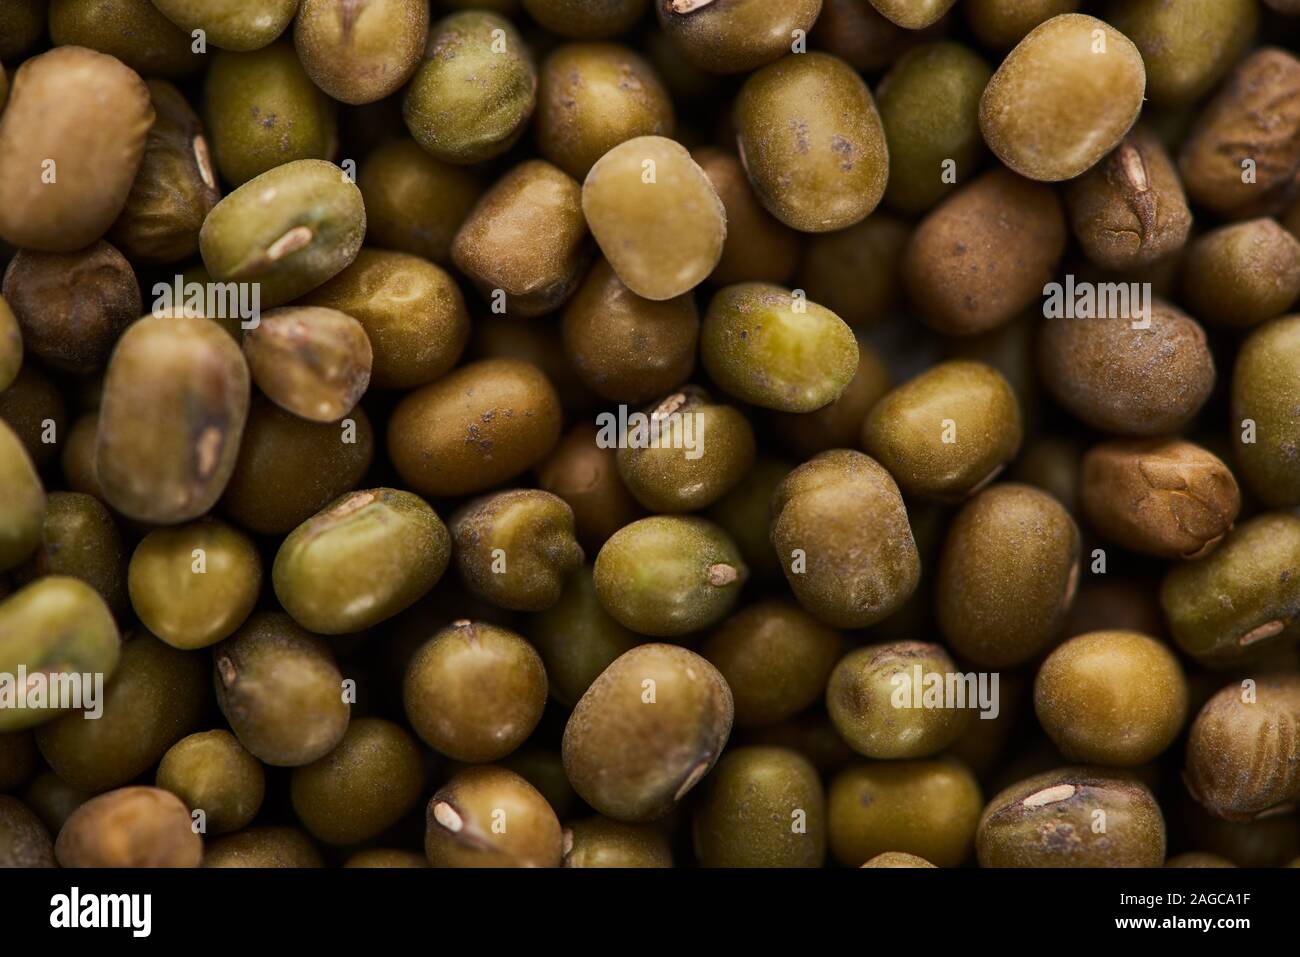 close up view of raw green maash beans Stock Photo